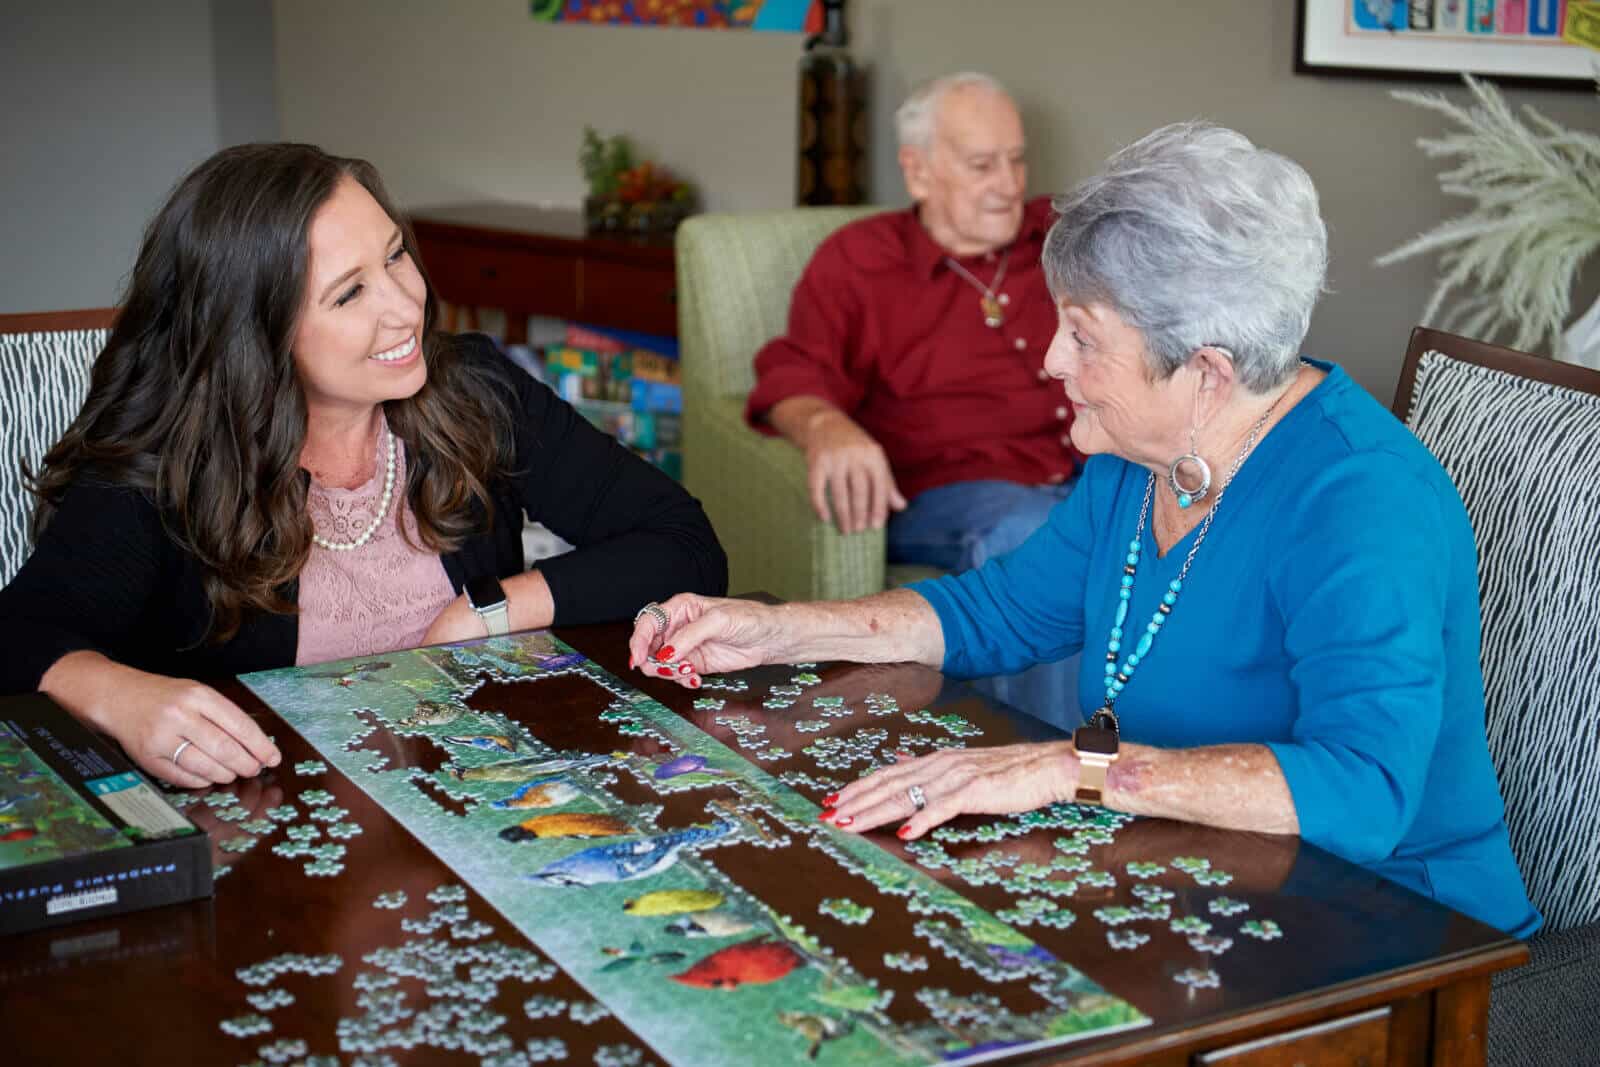 senior woman sitting a table putting a jigsaw puzzle together with young woman